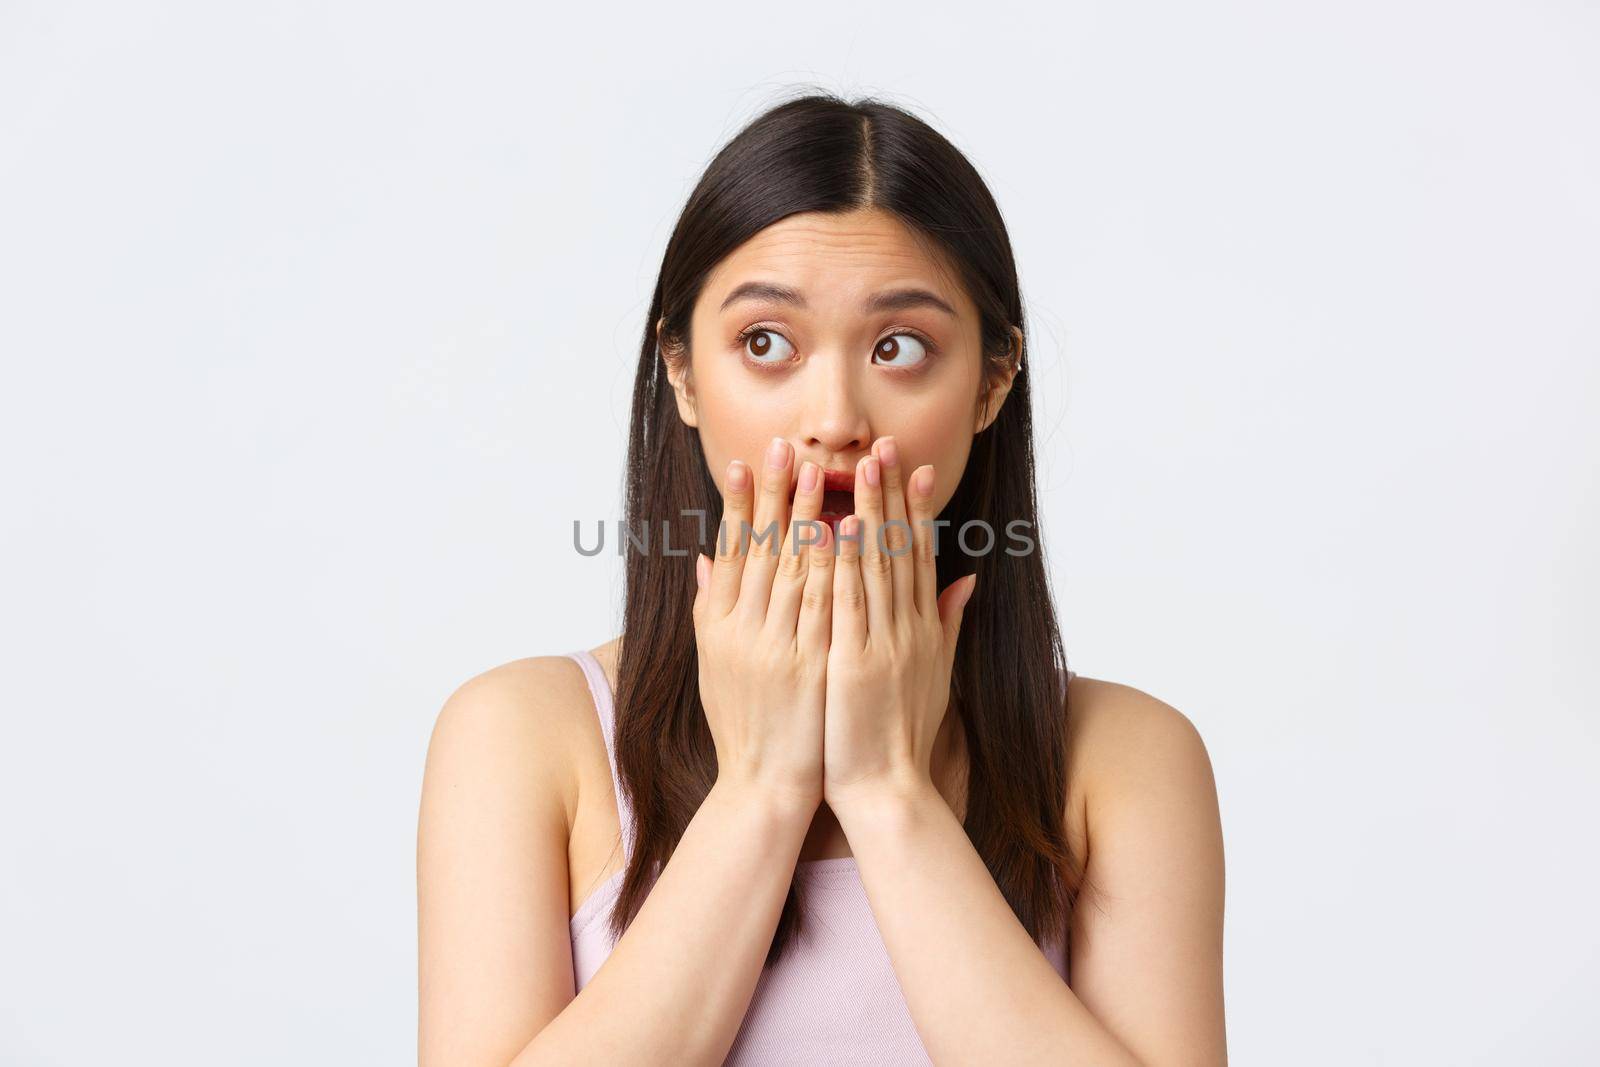 Beauty, fashion and people emotions concept. Shocked startled asian girl gasping, open mouth and cover it with palms, looking left astonished, standing concerned over white background.